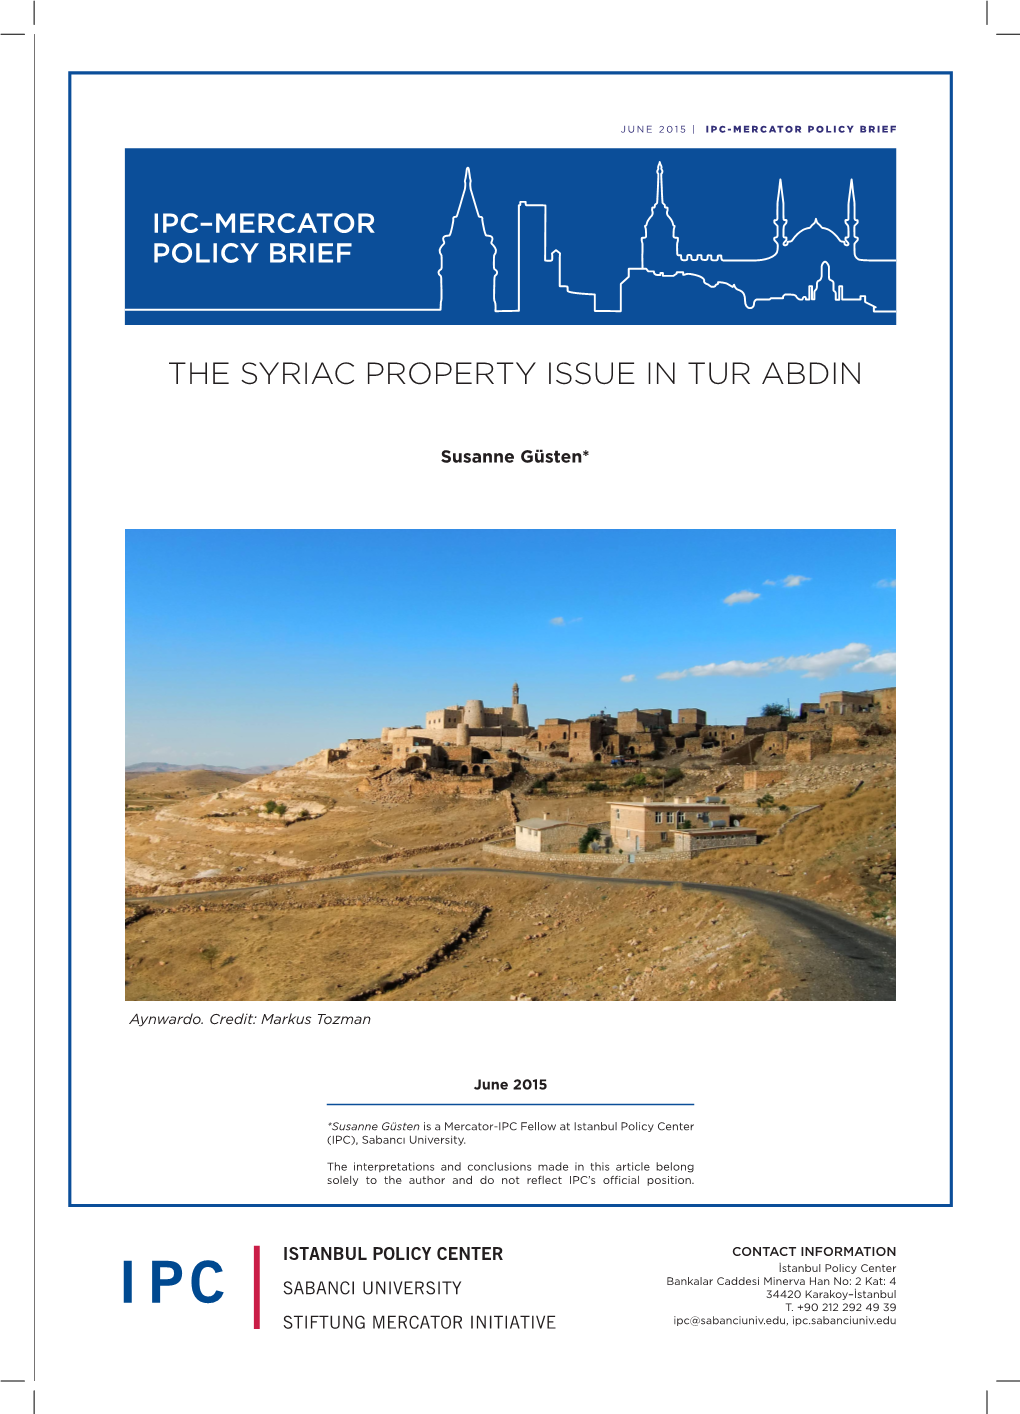 The Syriac Property Issue in Tur Abdin